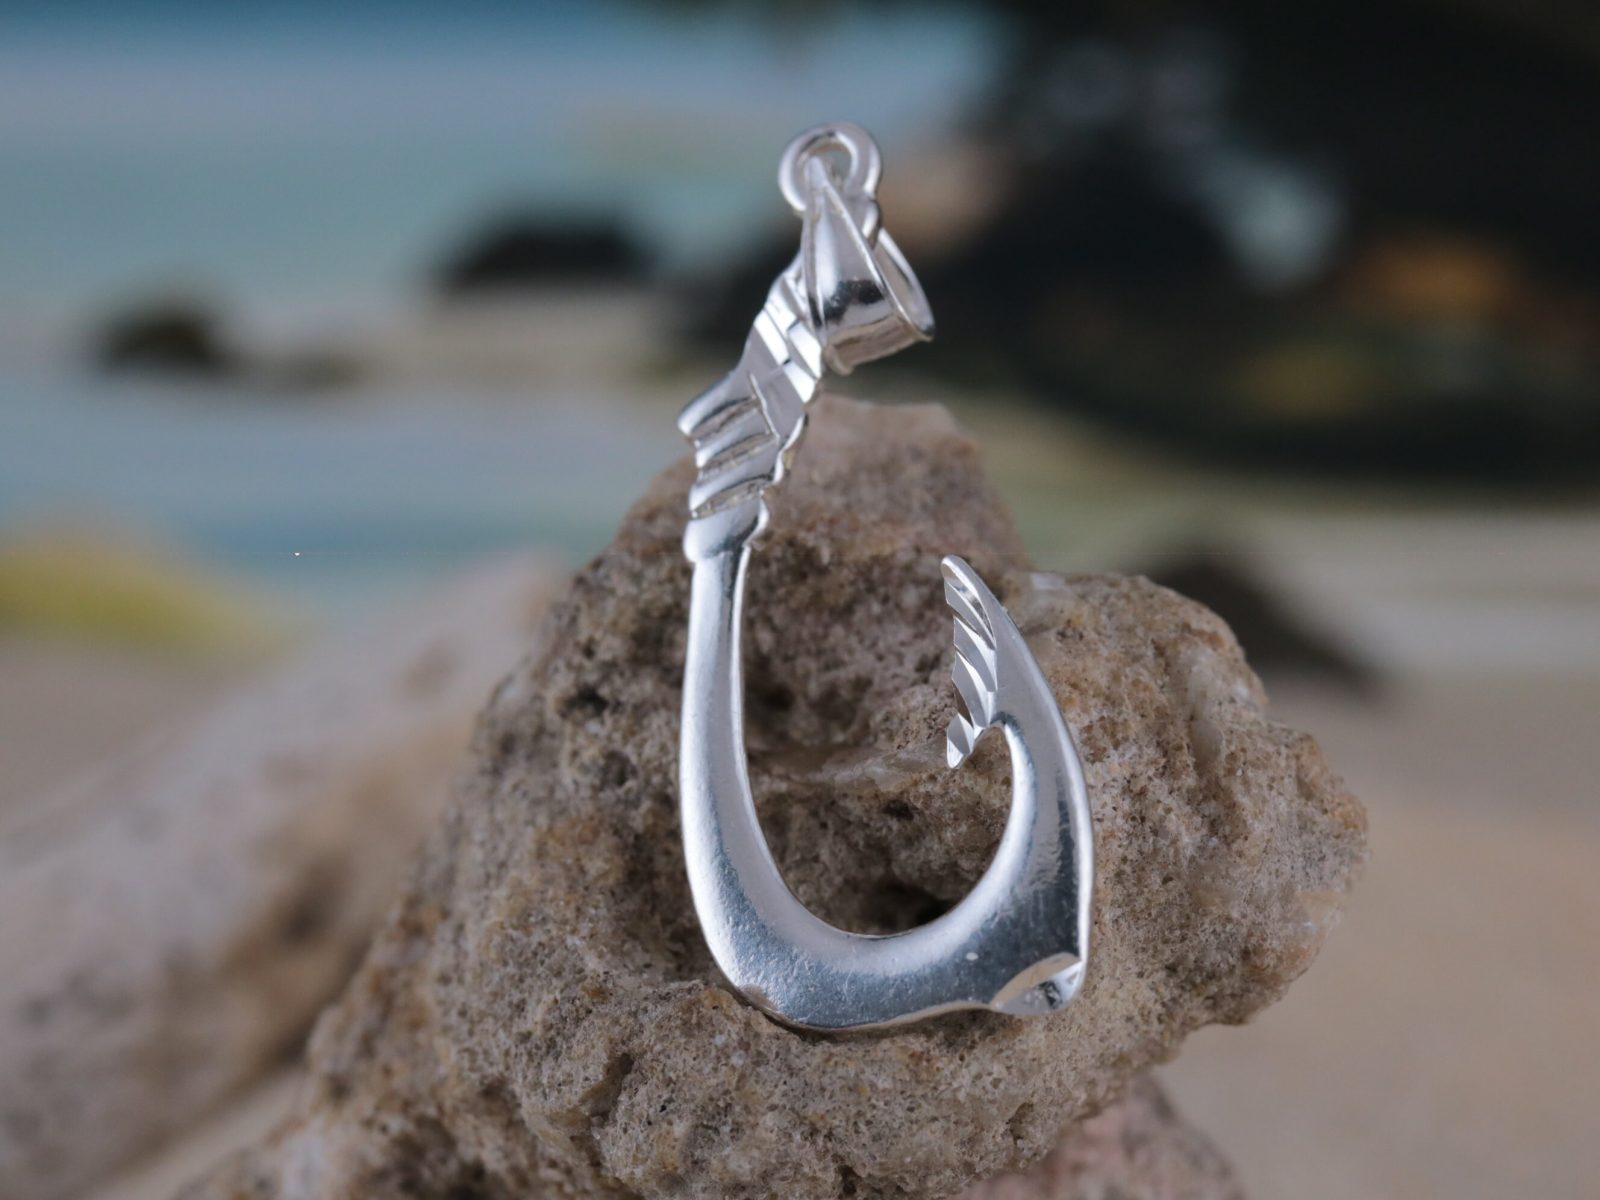 https://www.jewelrynetworkinc.com/wp-content/uploads/2023/04/hawaiian-fish-hook-pendant-sterling-silver-with-matte-finish-and-diamond-cut-details-fishermans-jewelry-free-fast-shipping-gift-for-men-642c6c85.jpg